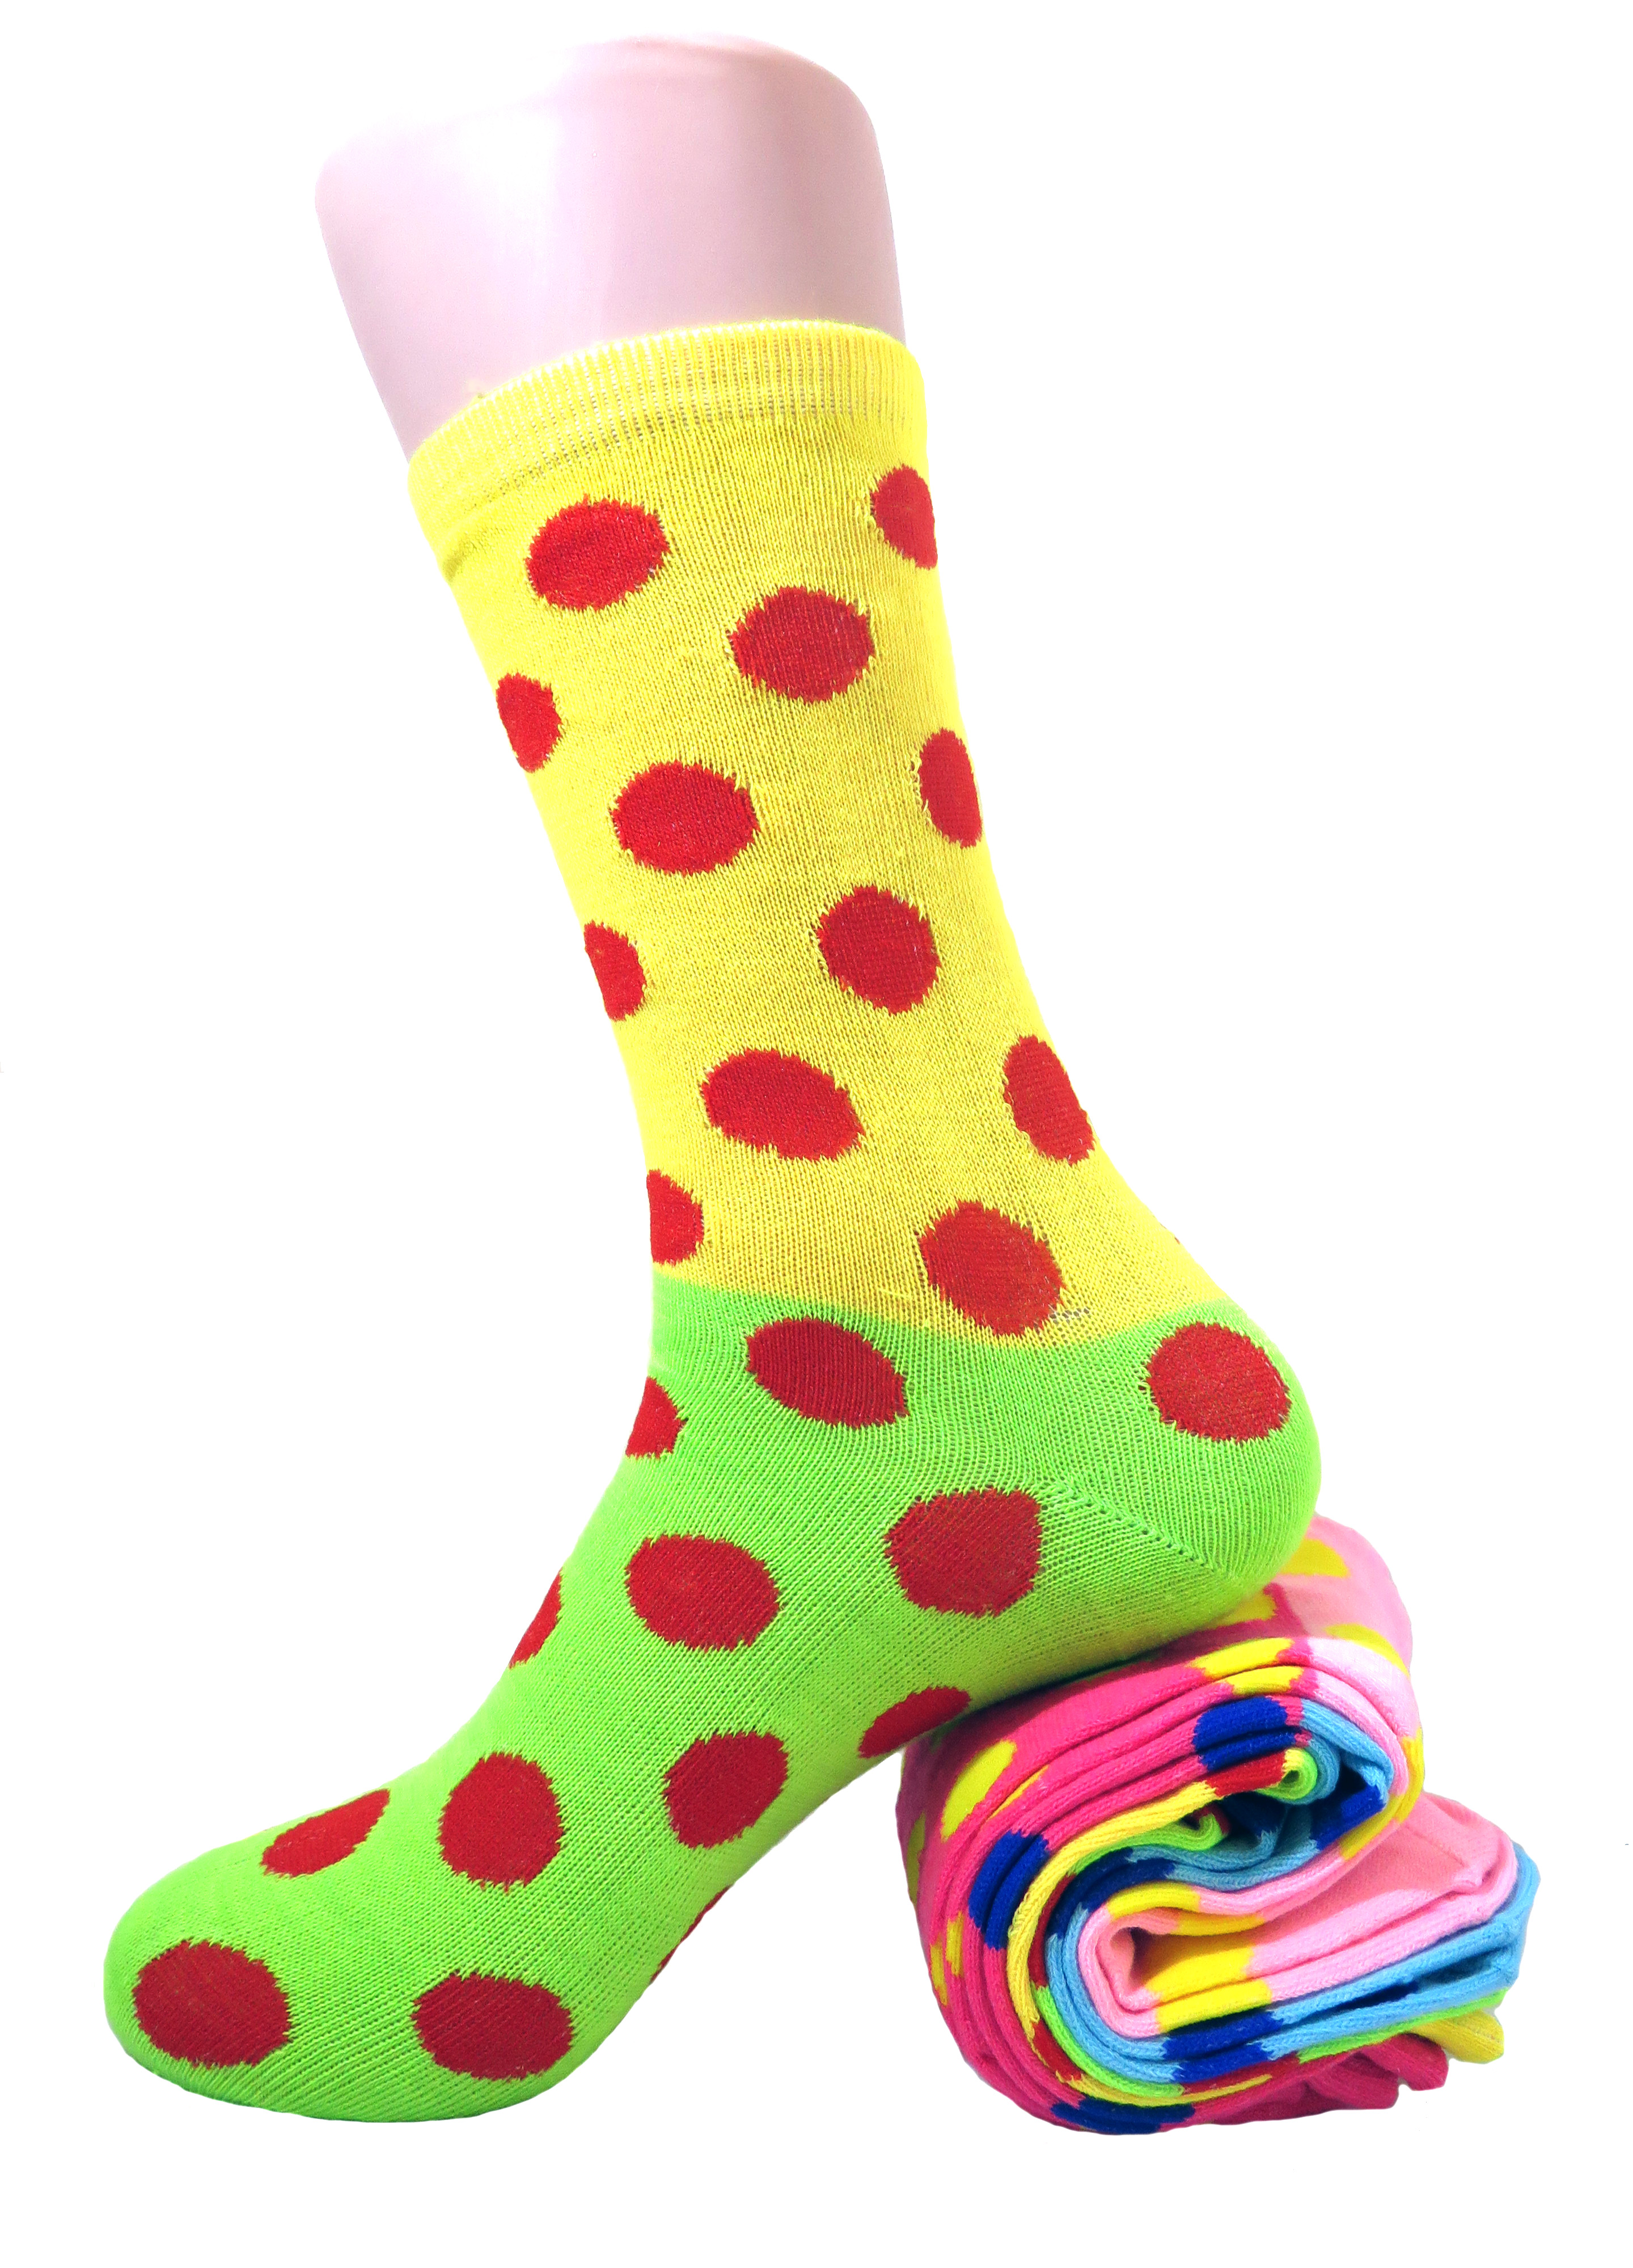 Fun & Colorful Two- Tone Polka Dot Assorted 6 Pack Crew Socks - image 3 of 3